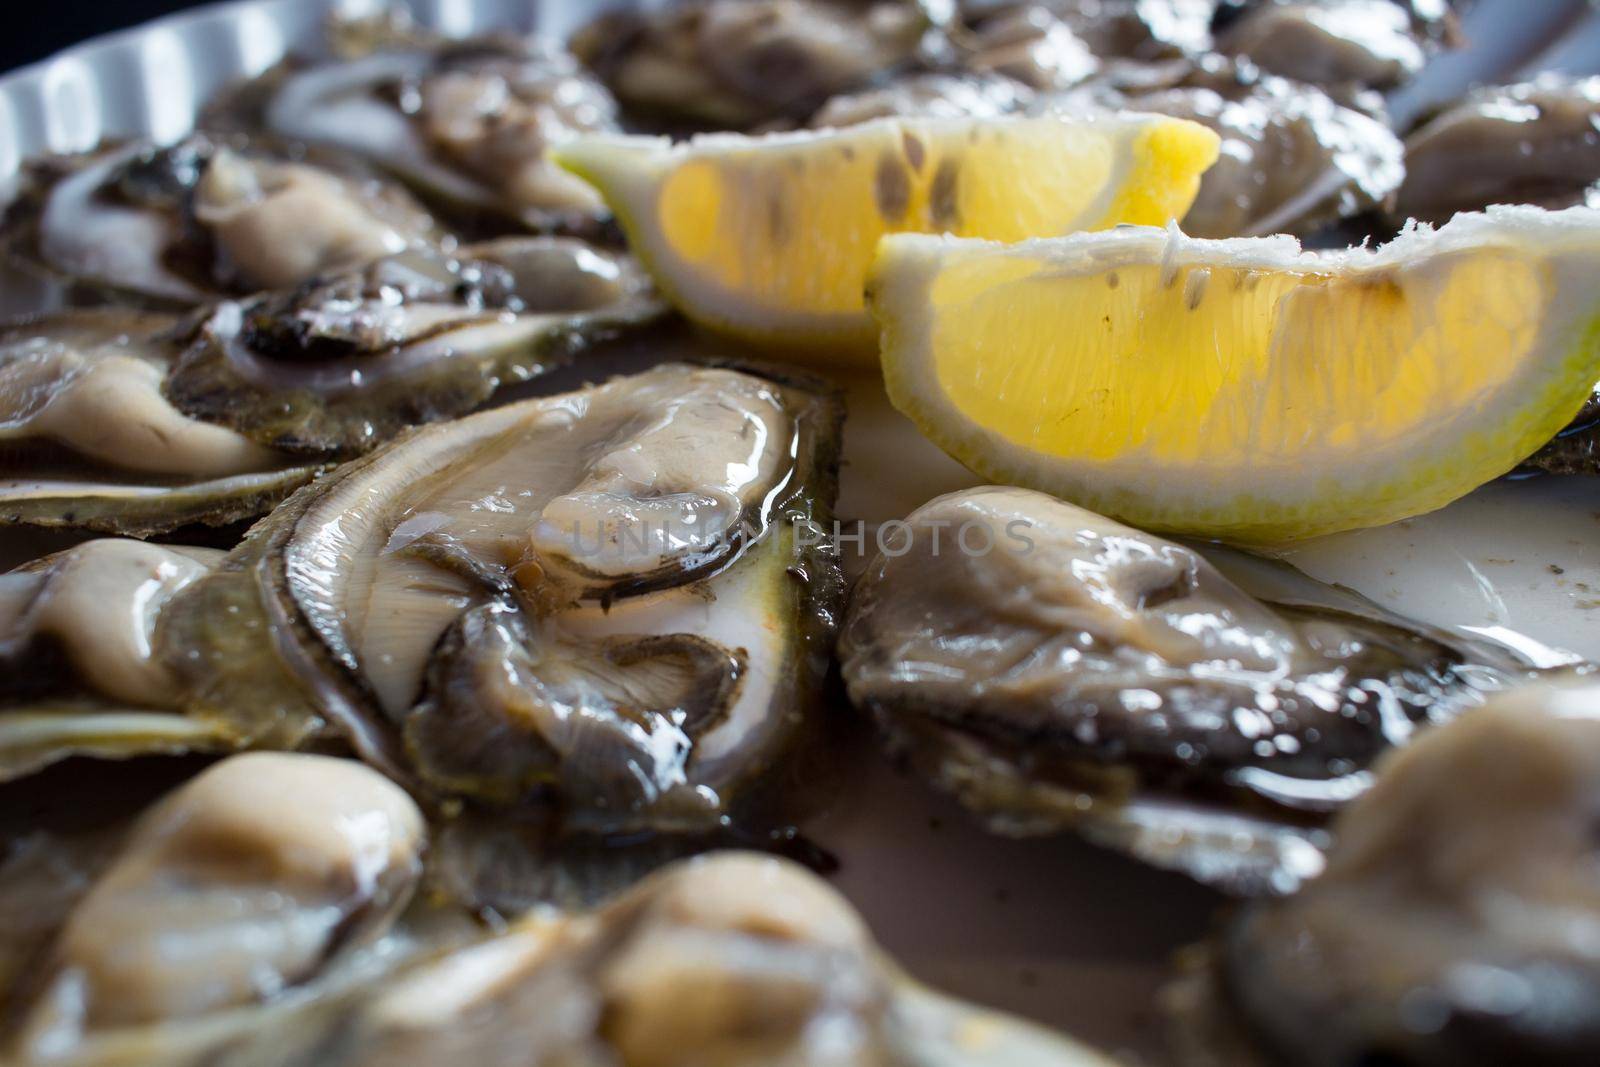 Food plate of fresh natural organic oysters with lemon by VeraVerano